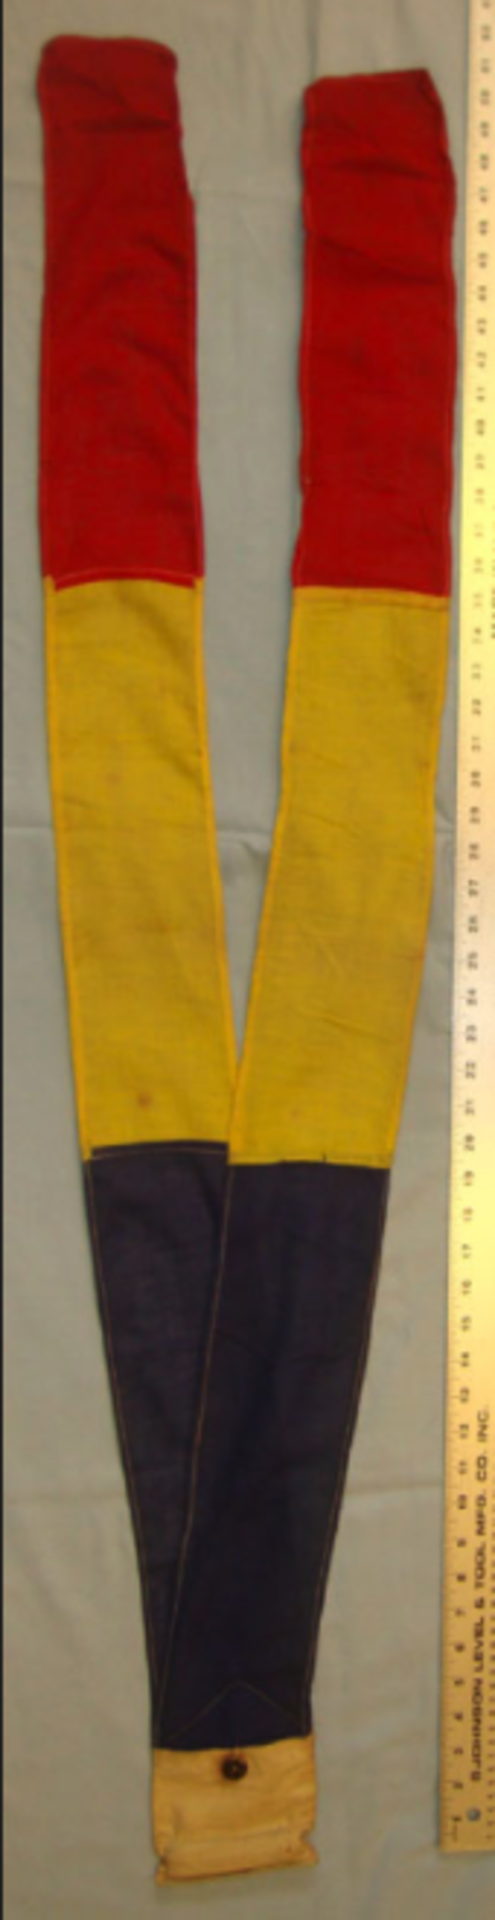 Original, WW1 Era Royal Flying Corps (RFC) 2 Tail Message Streamer With Message - Image 3 of 6